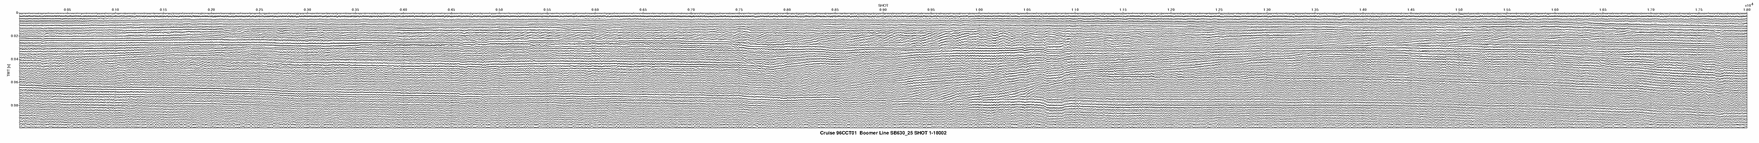 SB630_25 seismic profile thumbnail image with link to full size image